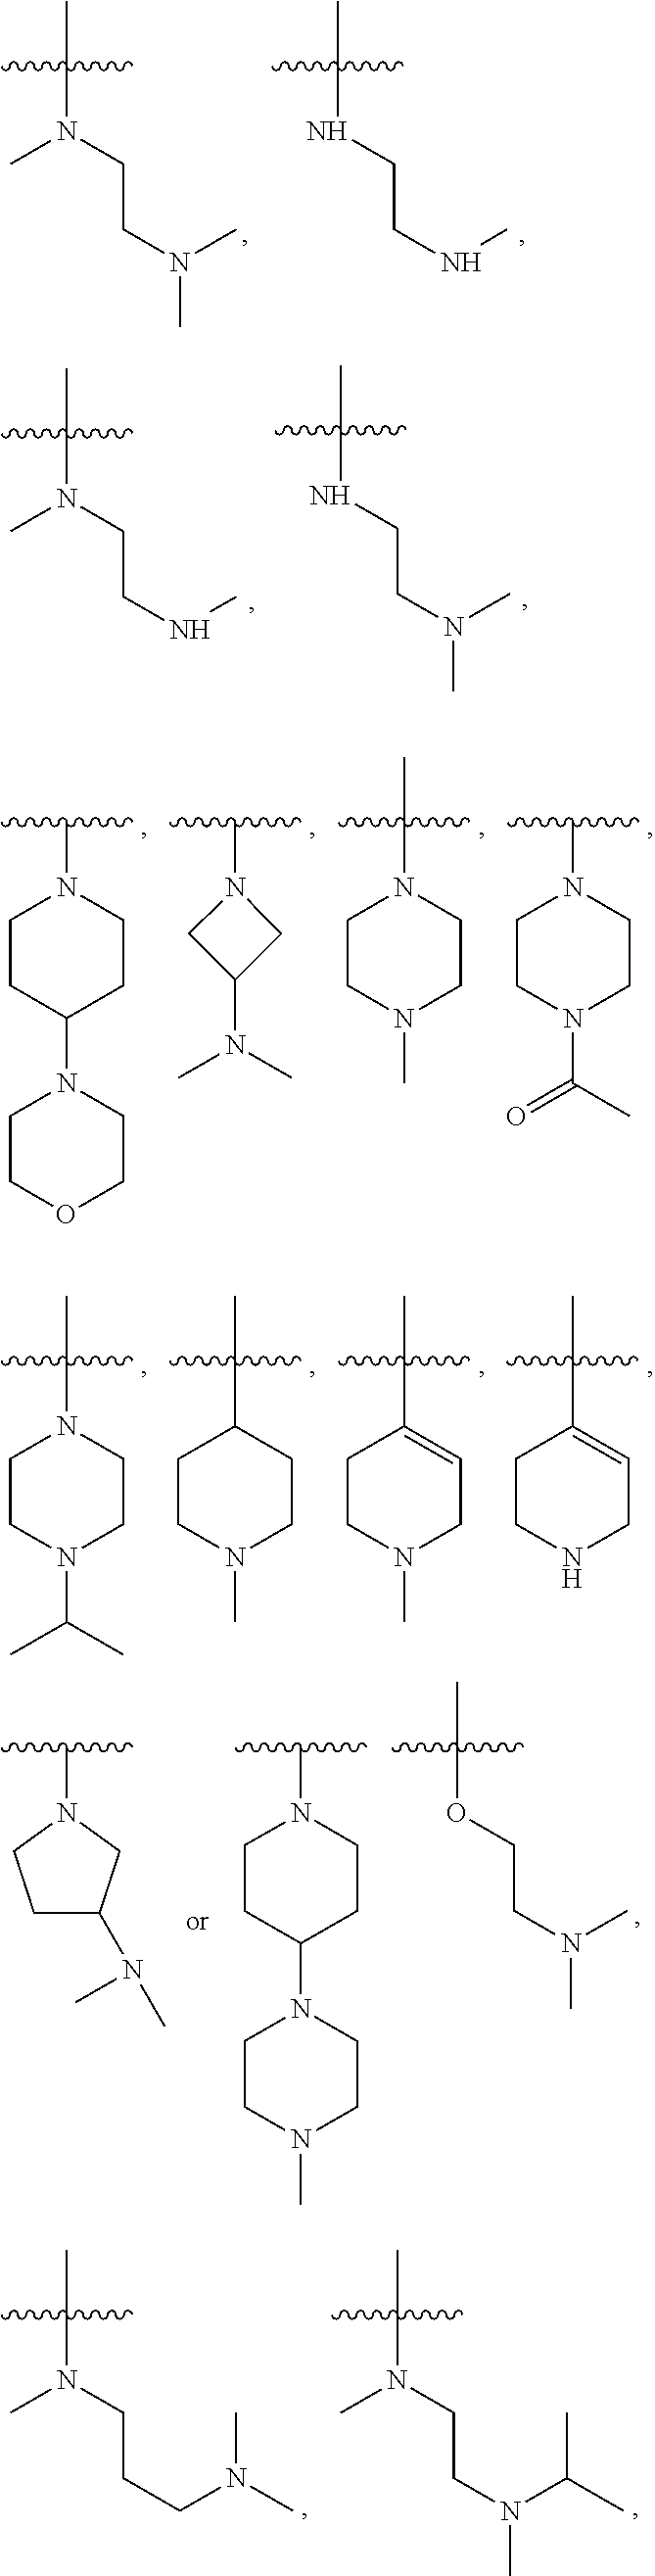 2,4-disubstituted phenylene-1,5-diamine derivatives and applications thereof, and pharmaceutical compositions and pharmaceutically acceptable compositions prepared therefrom